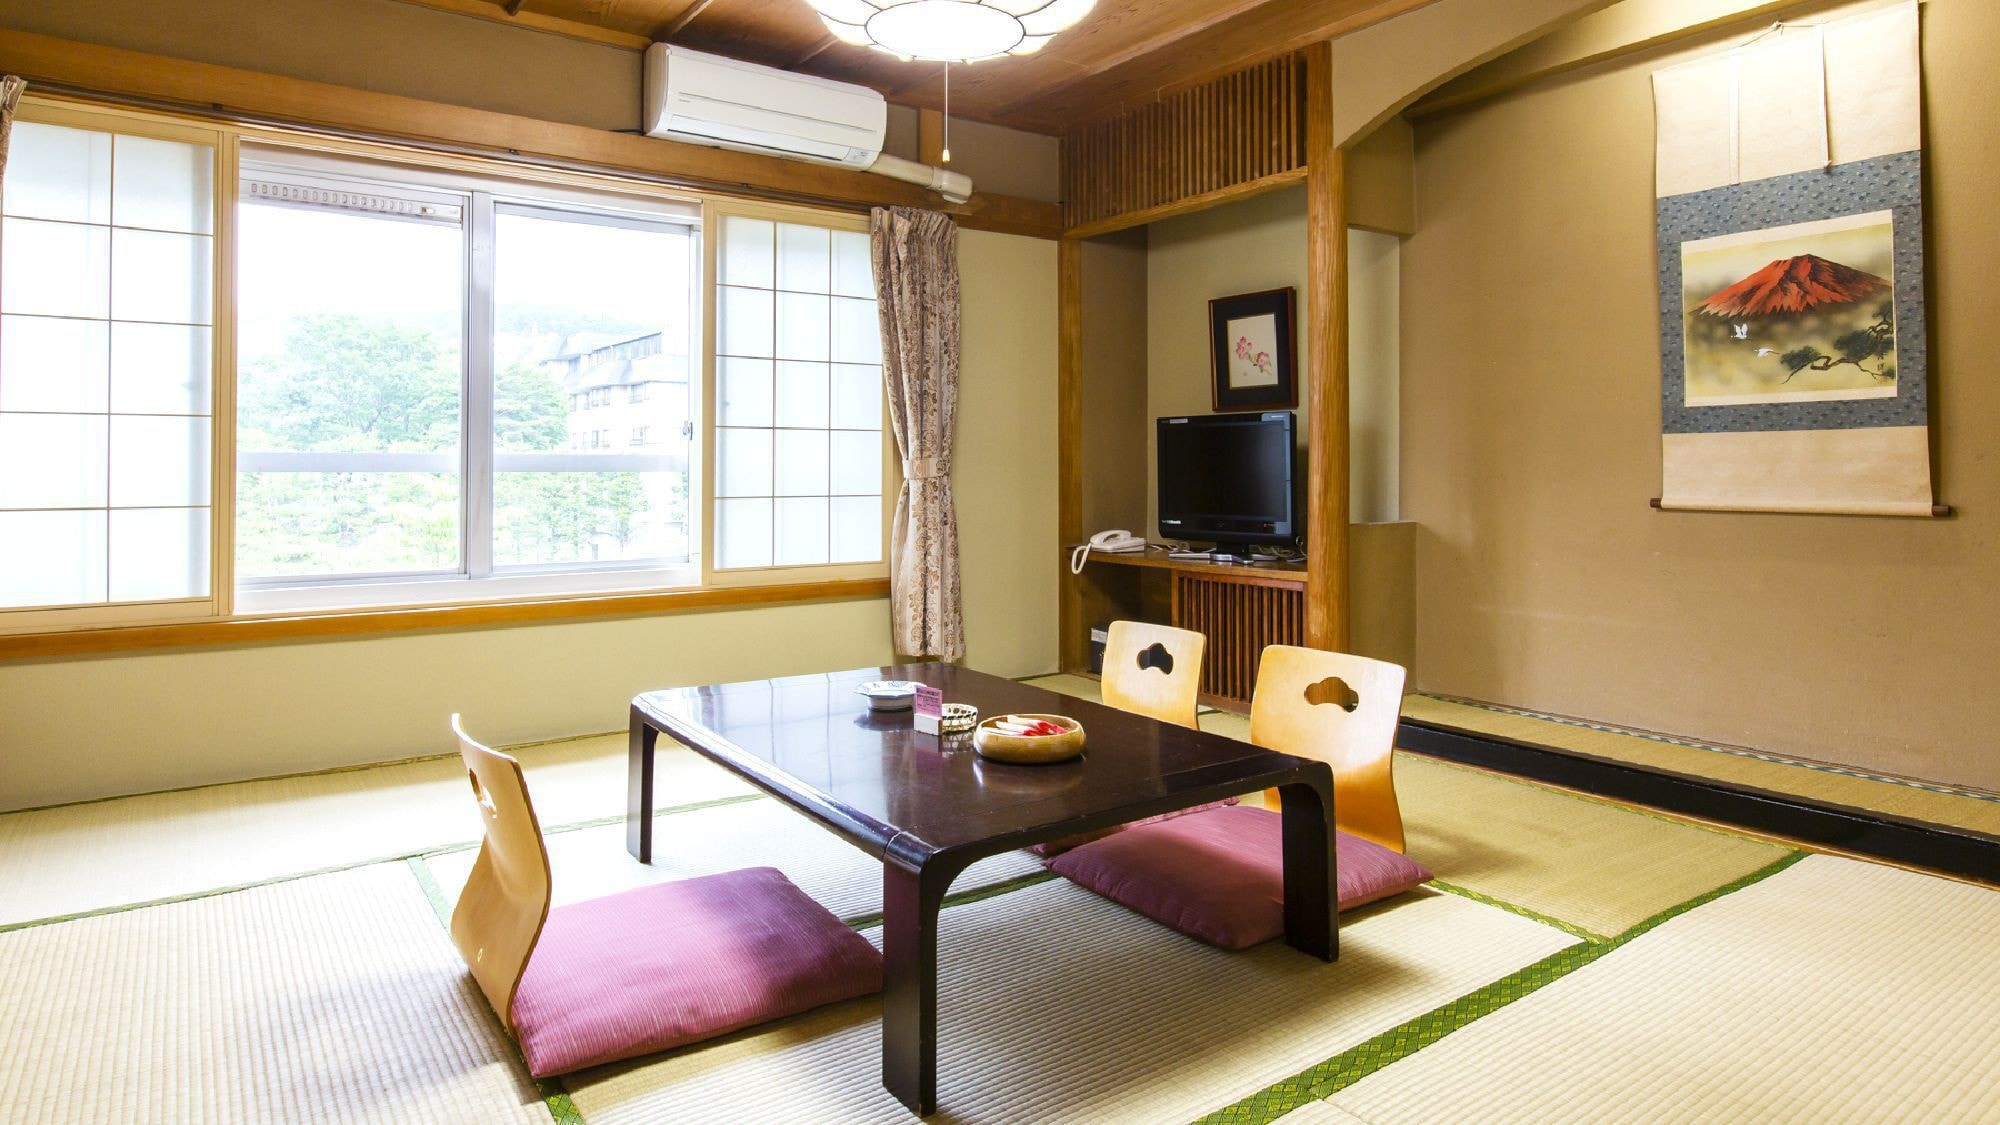 ◇ [Main Building] 8 tatami mats (example) / Japanese-style room in the main building, which is popular with families and elderly customers